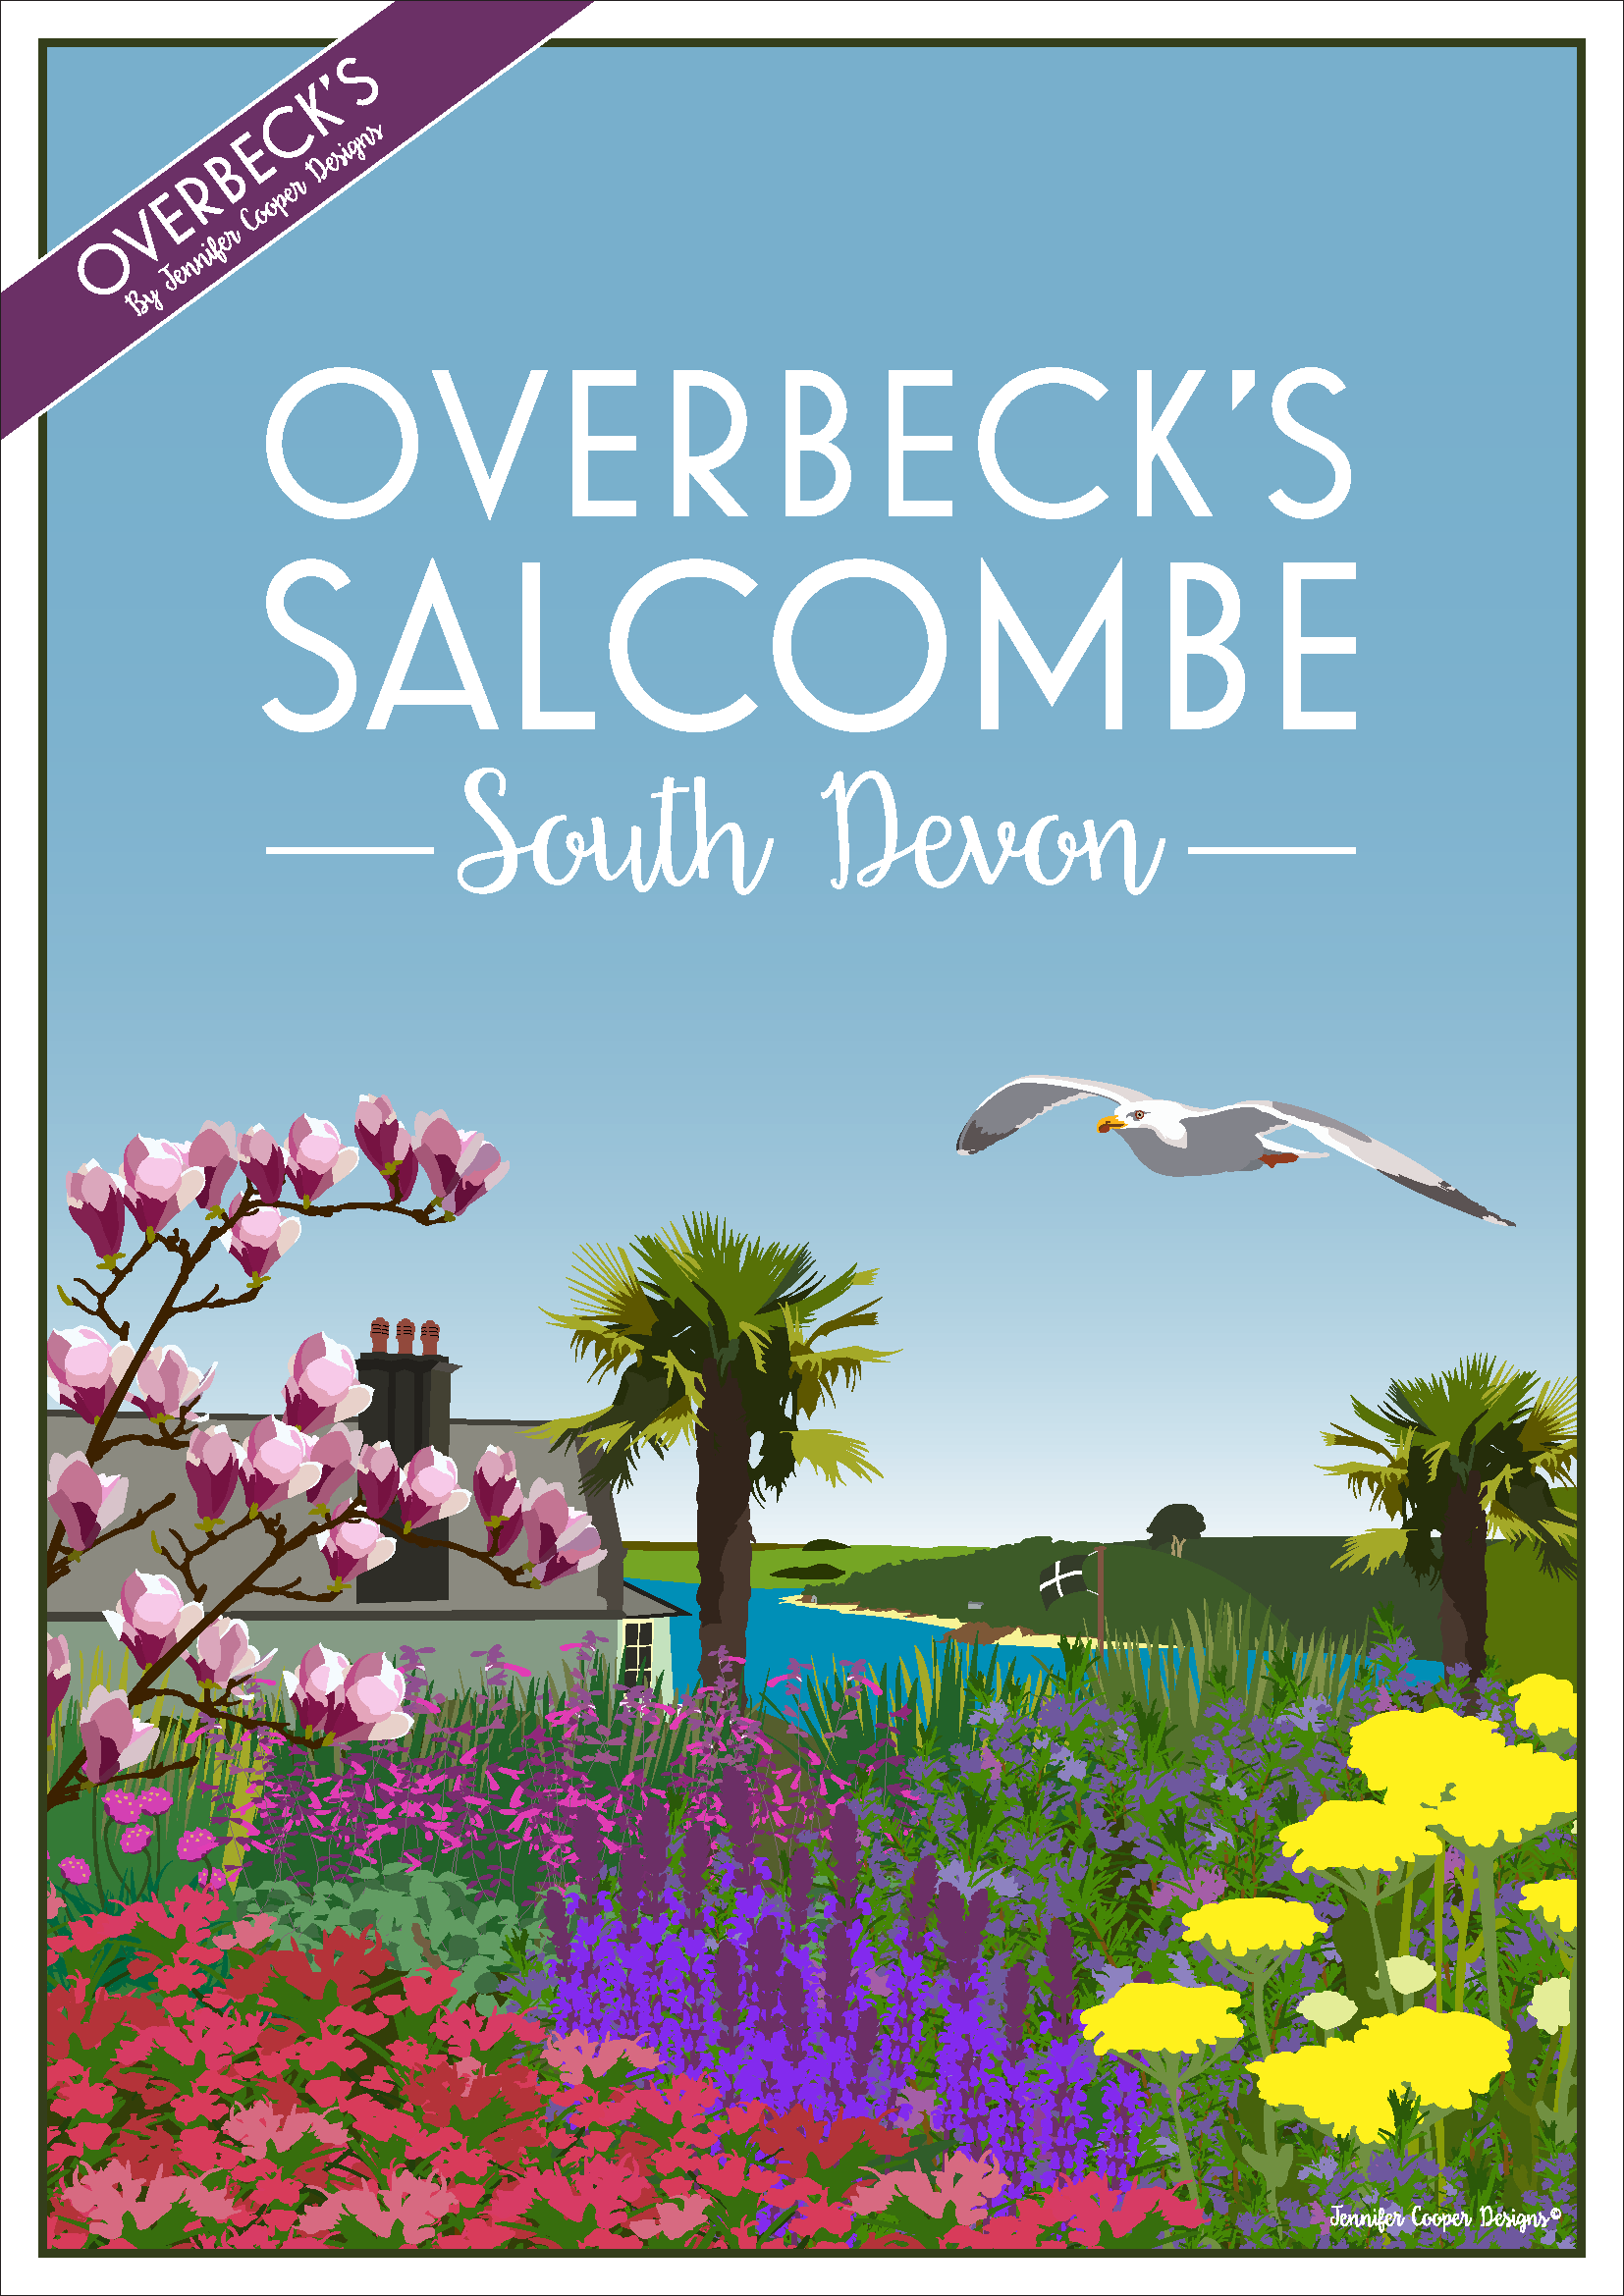 Overbeck's, Salcombe